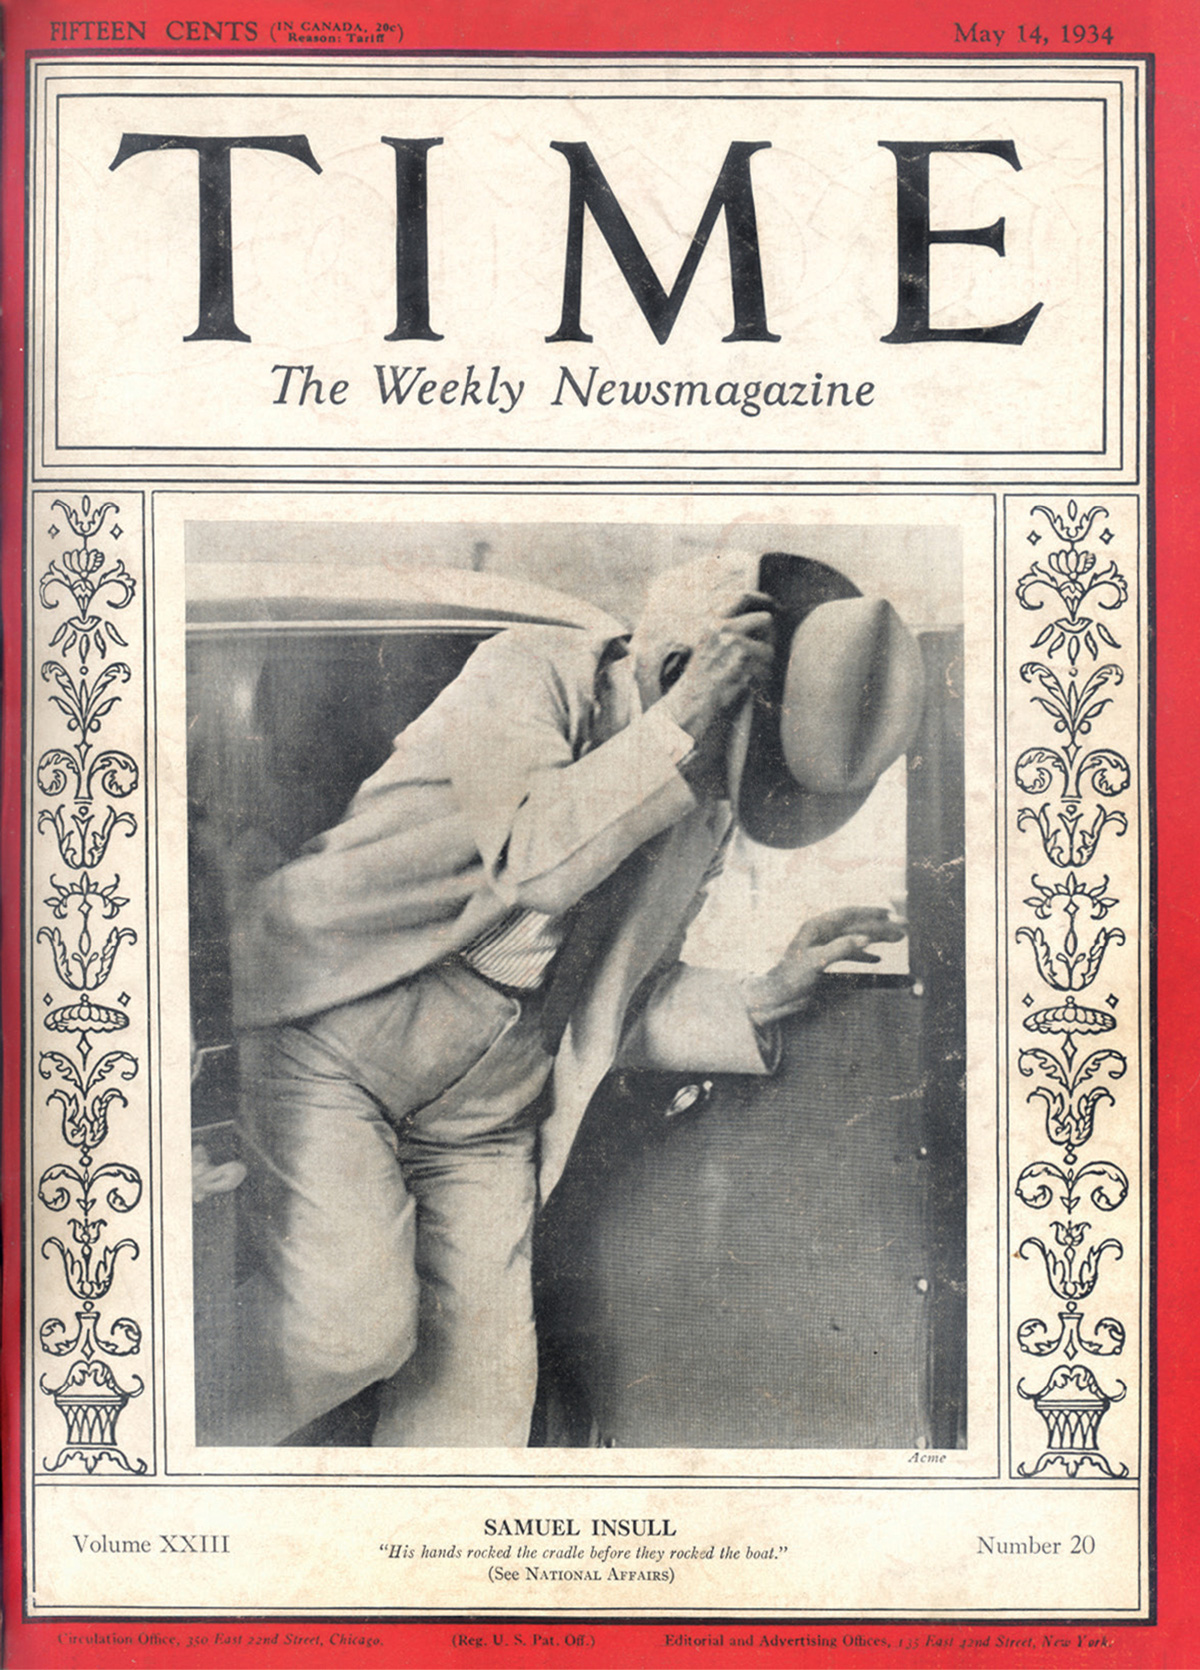 A mid-scandal Samuel Insull on the cover of Time magazine, 14 May 1934.